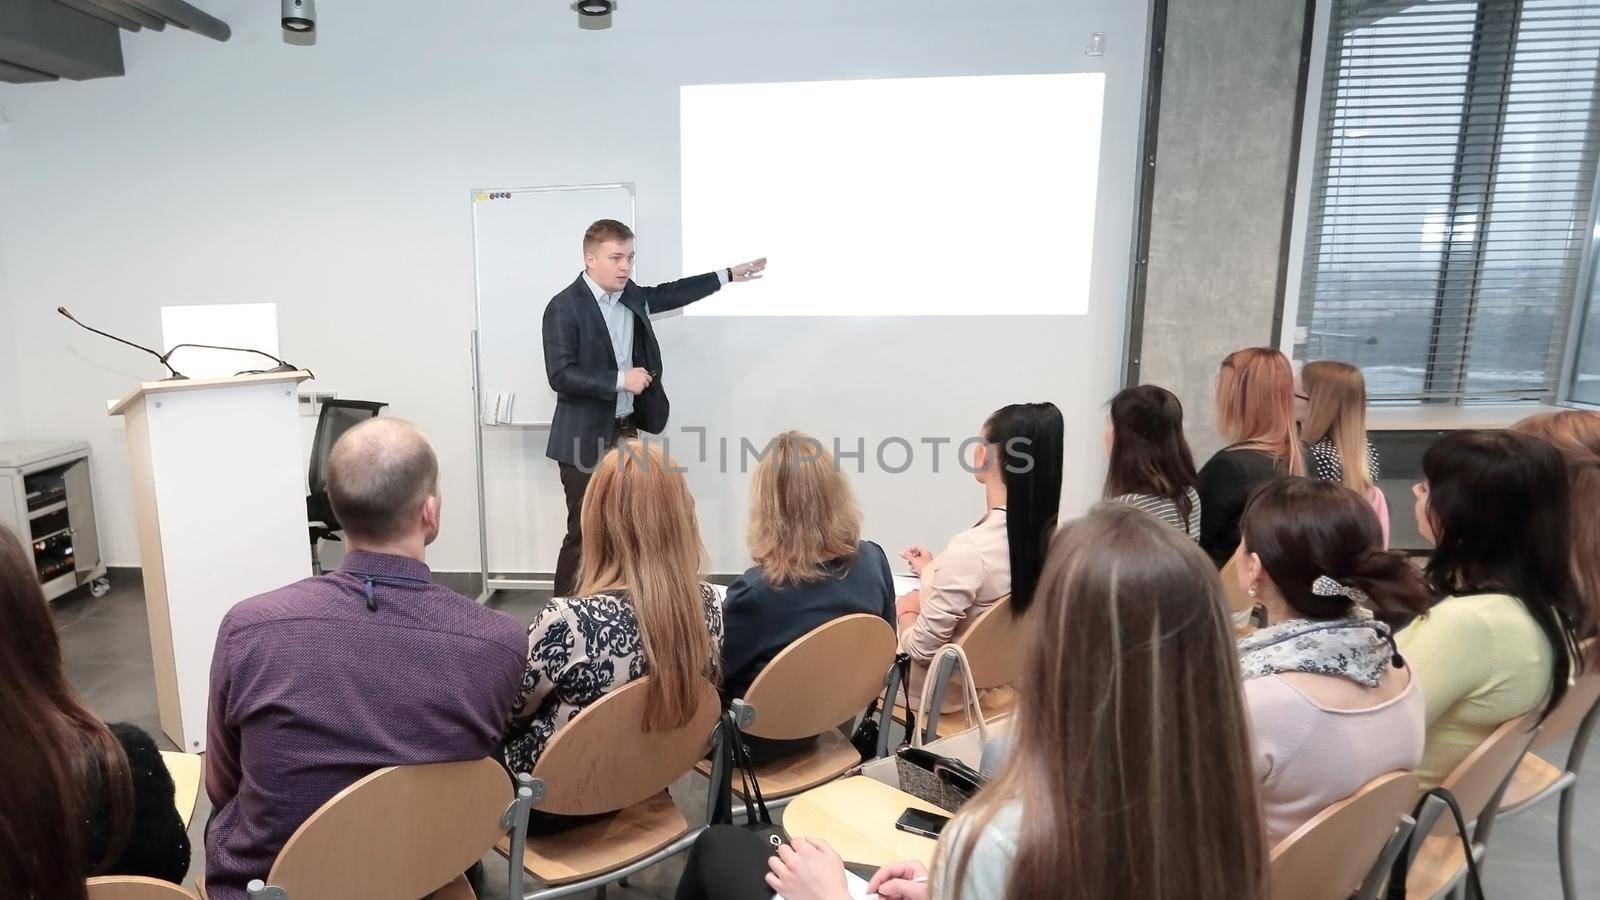 Manager makes a presentation to his business team by SmartPhotoLab